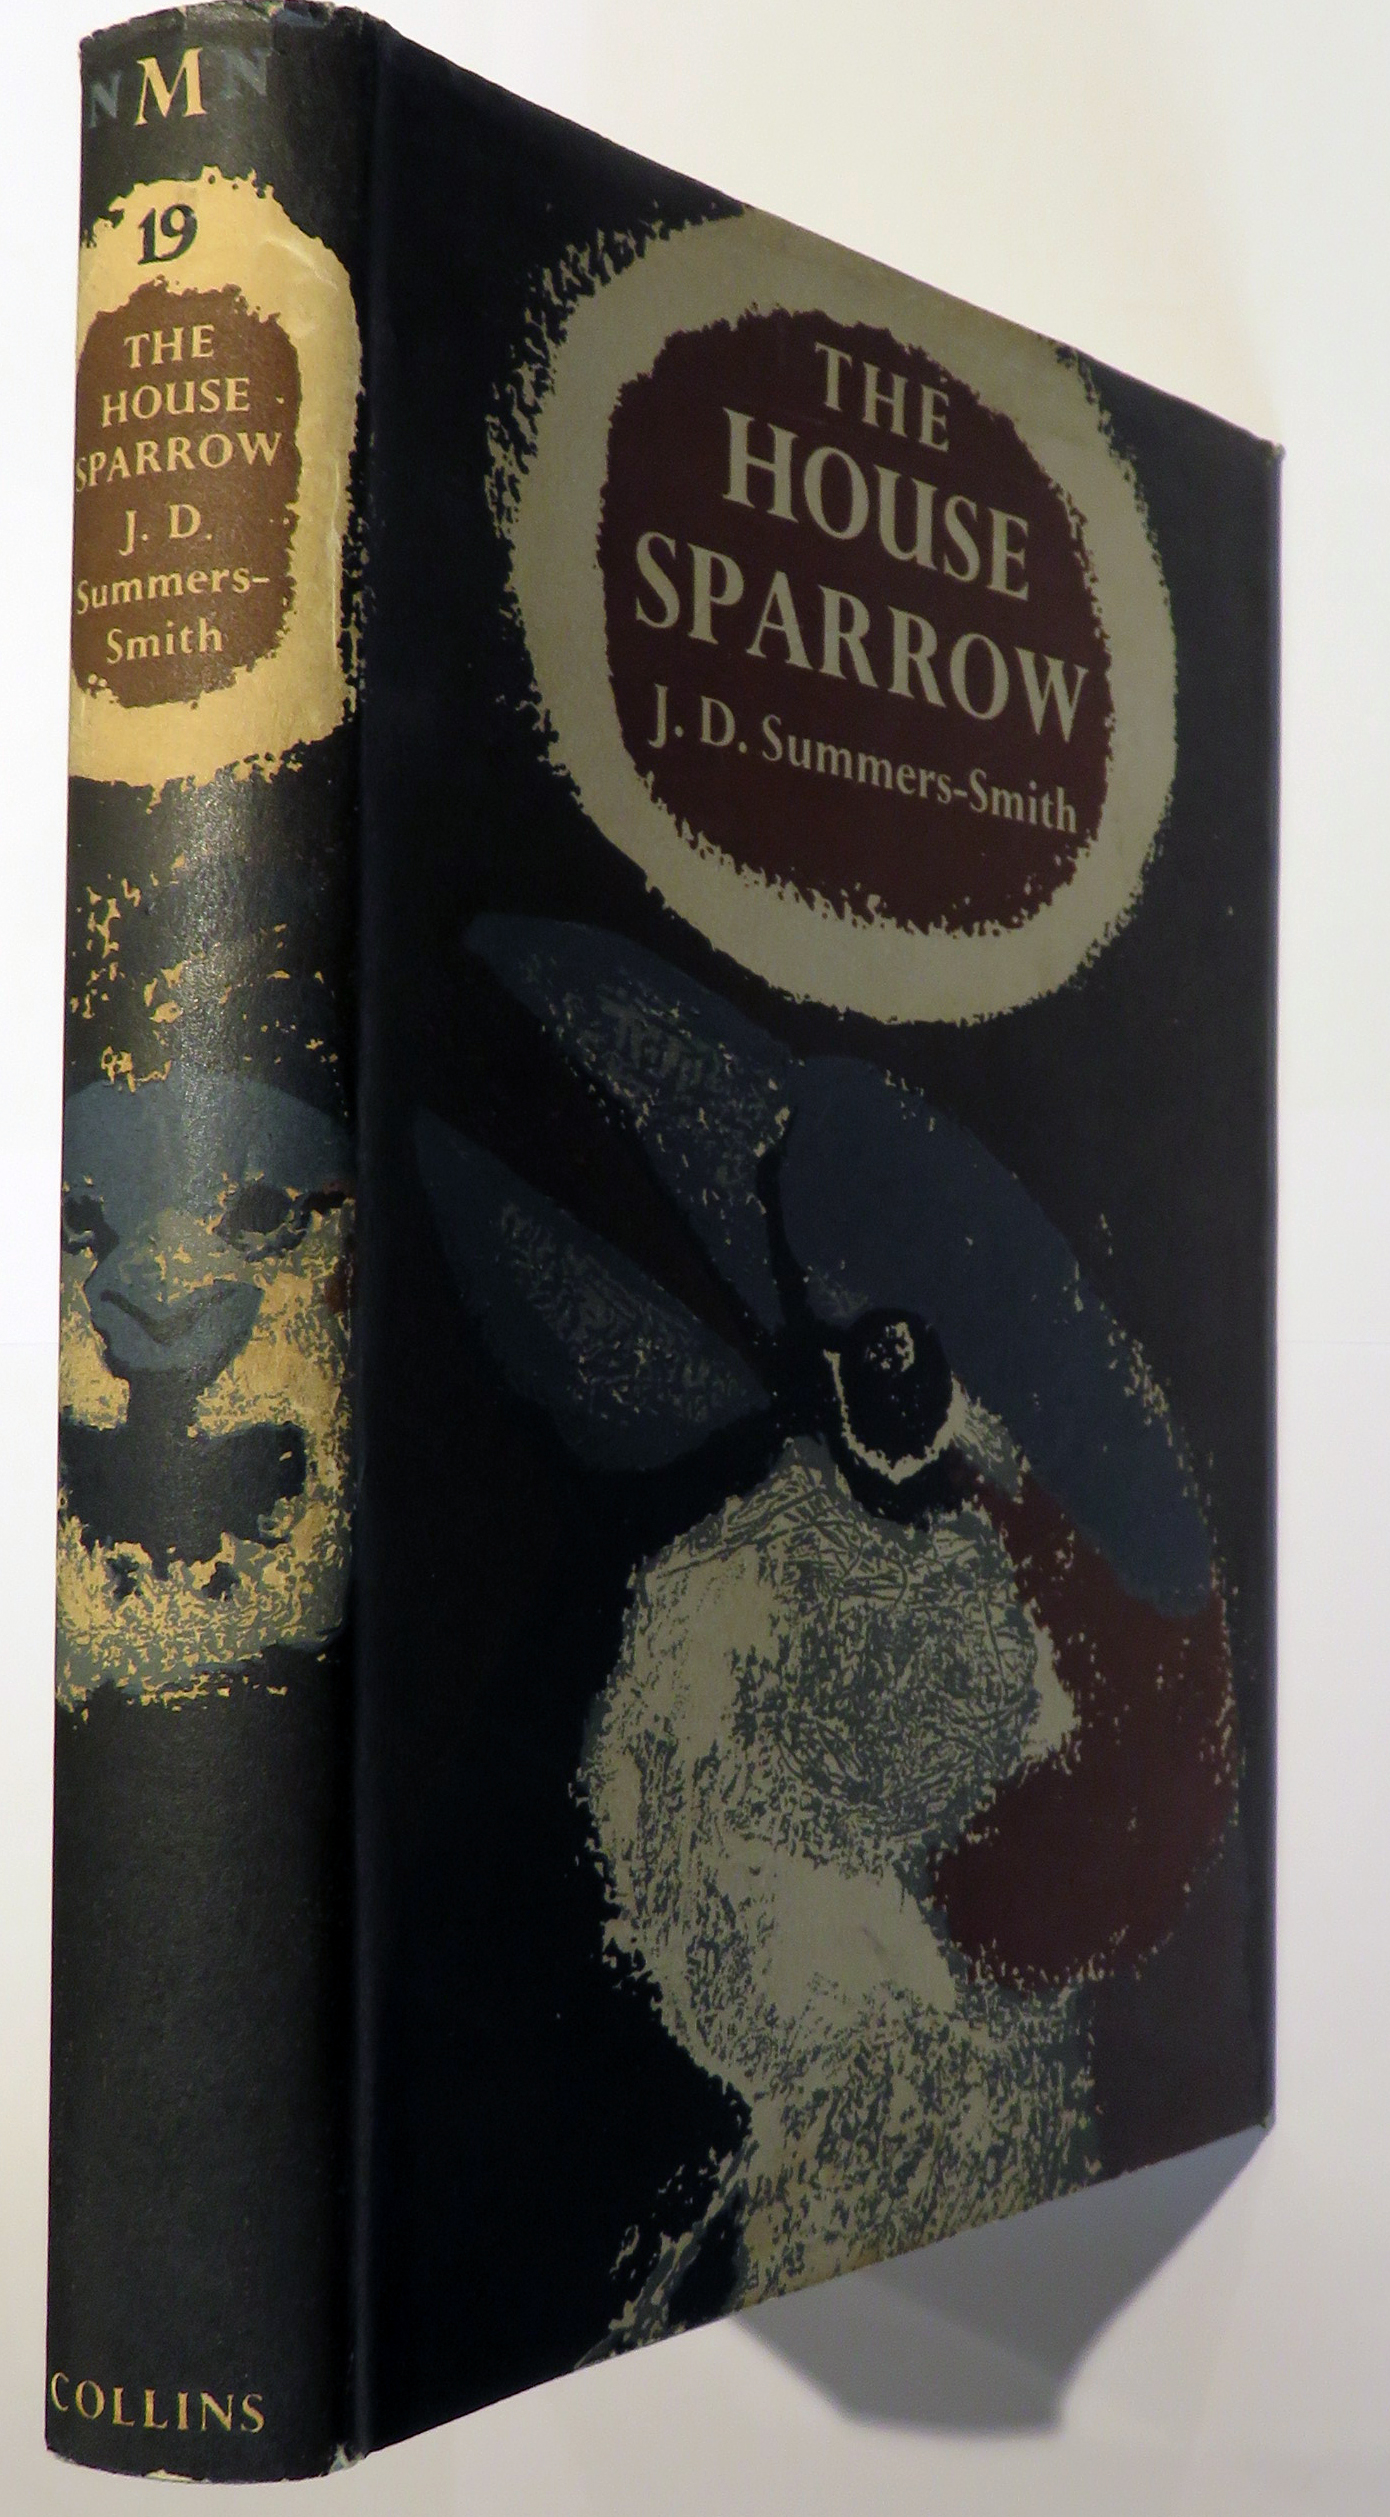 The House Sparrow. The New Naturalist Monograph Series No. 19